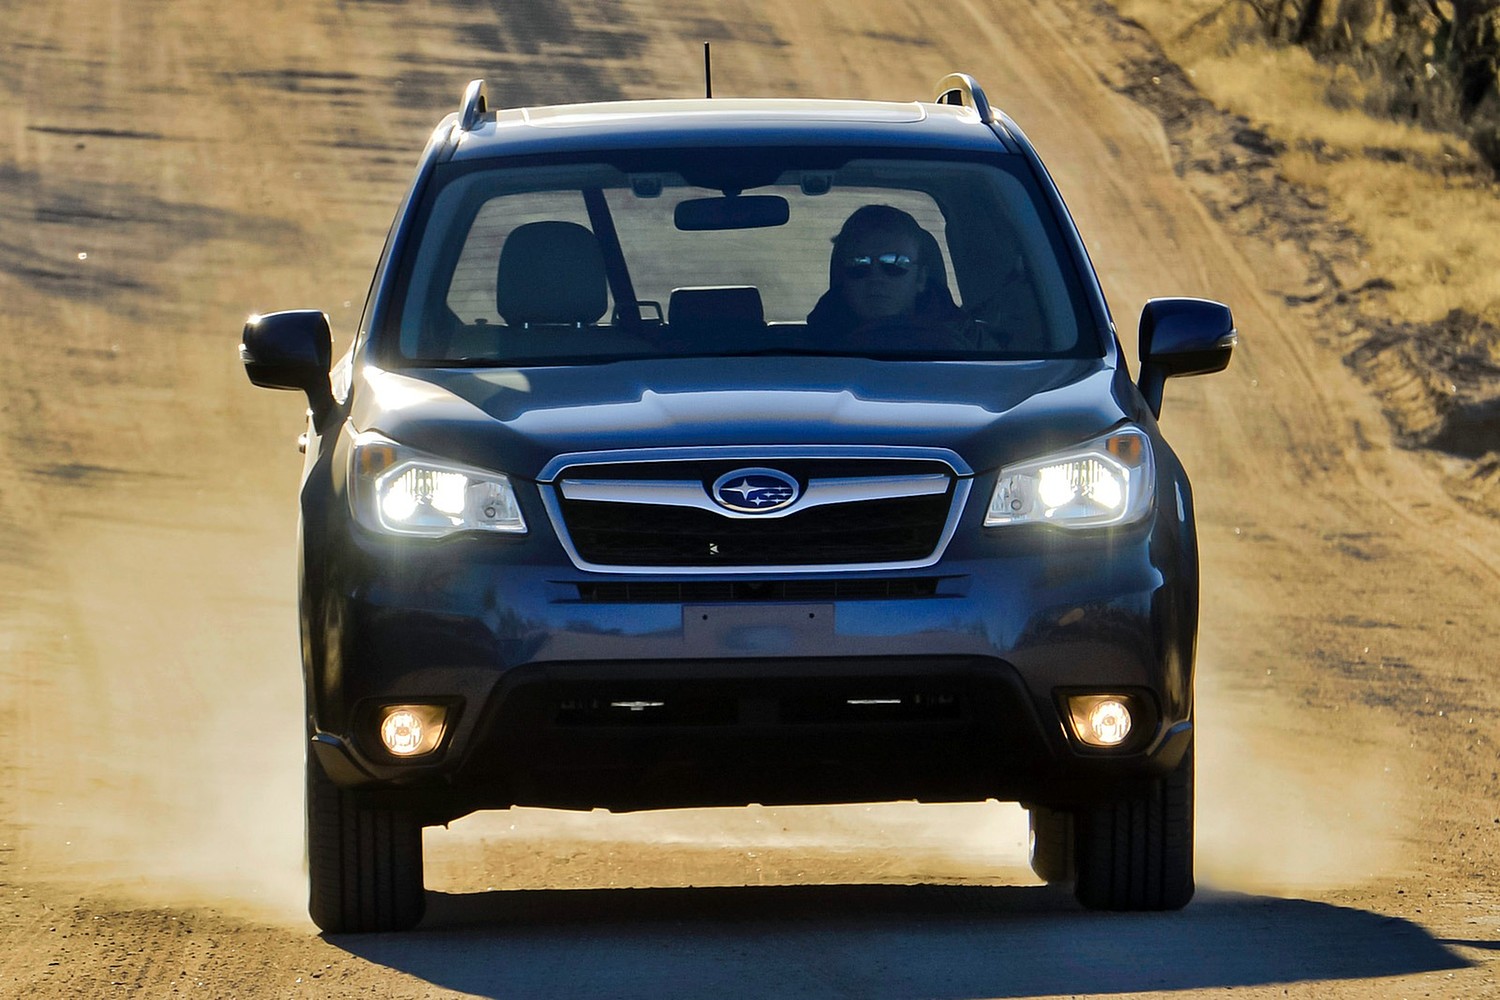 Subaru Forester 2.5i Limited PZEV 4dr SUV Exterior (2015 model year shown)